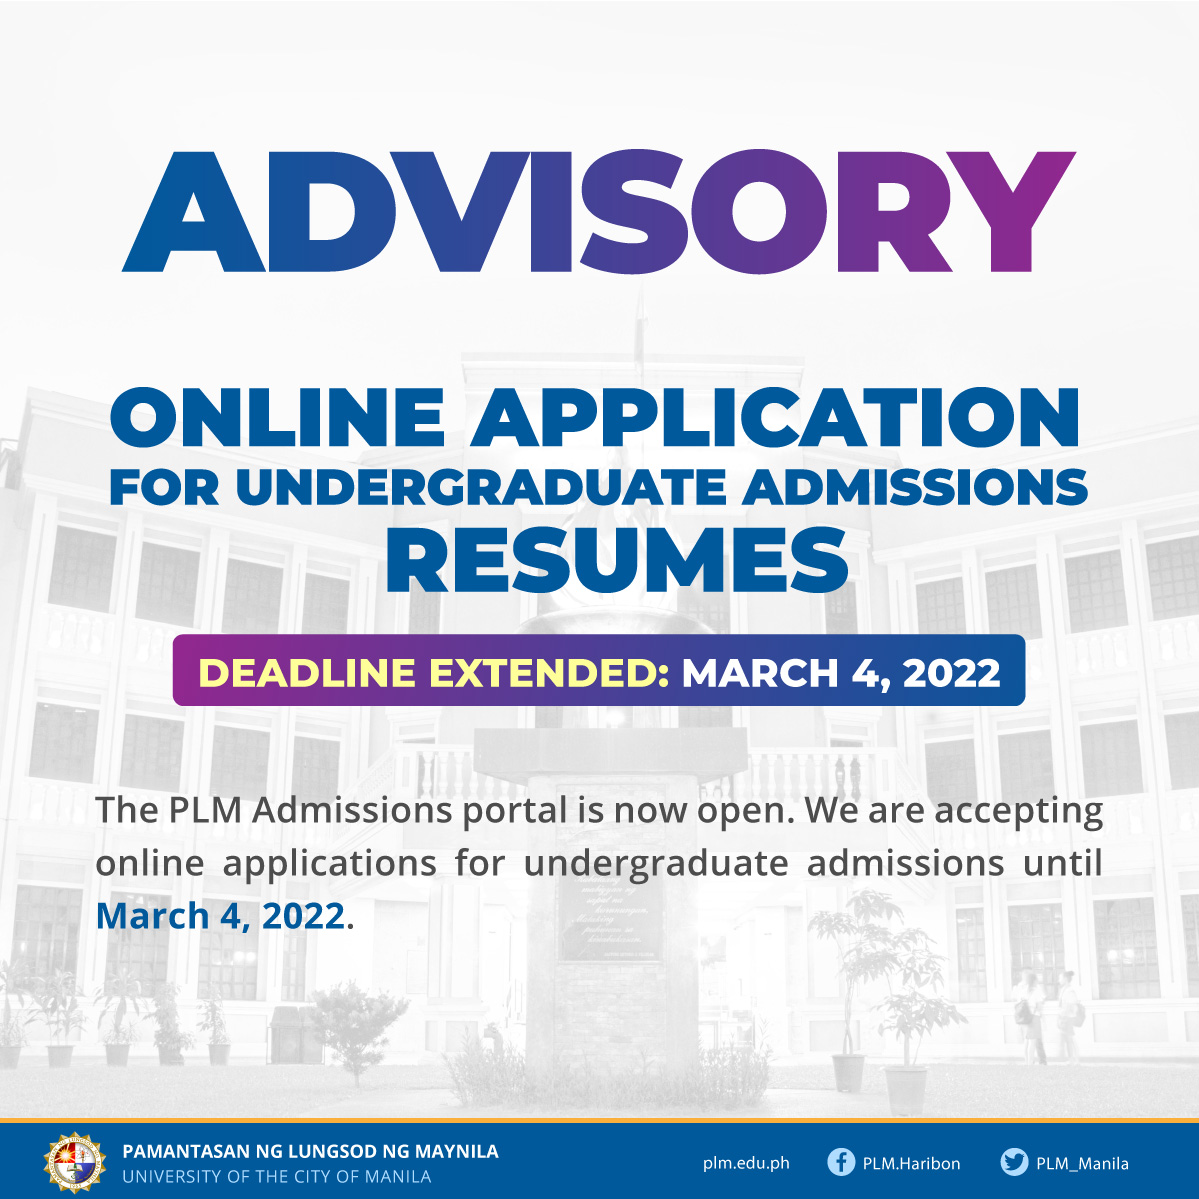 Online admissions resumes; deadline extended until March 4, 2022 